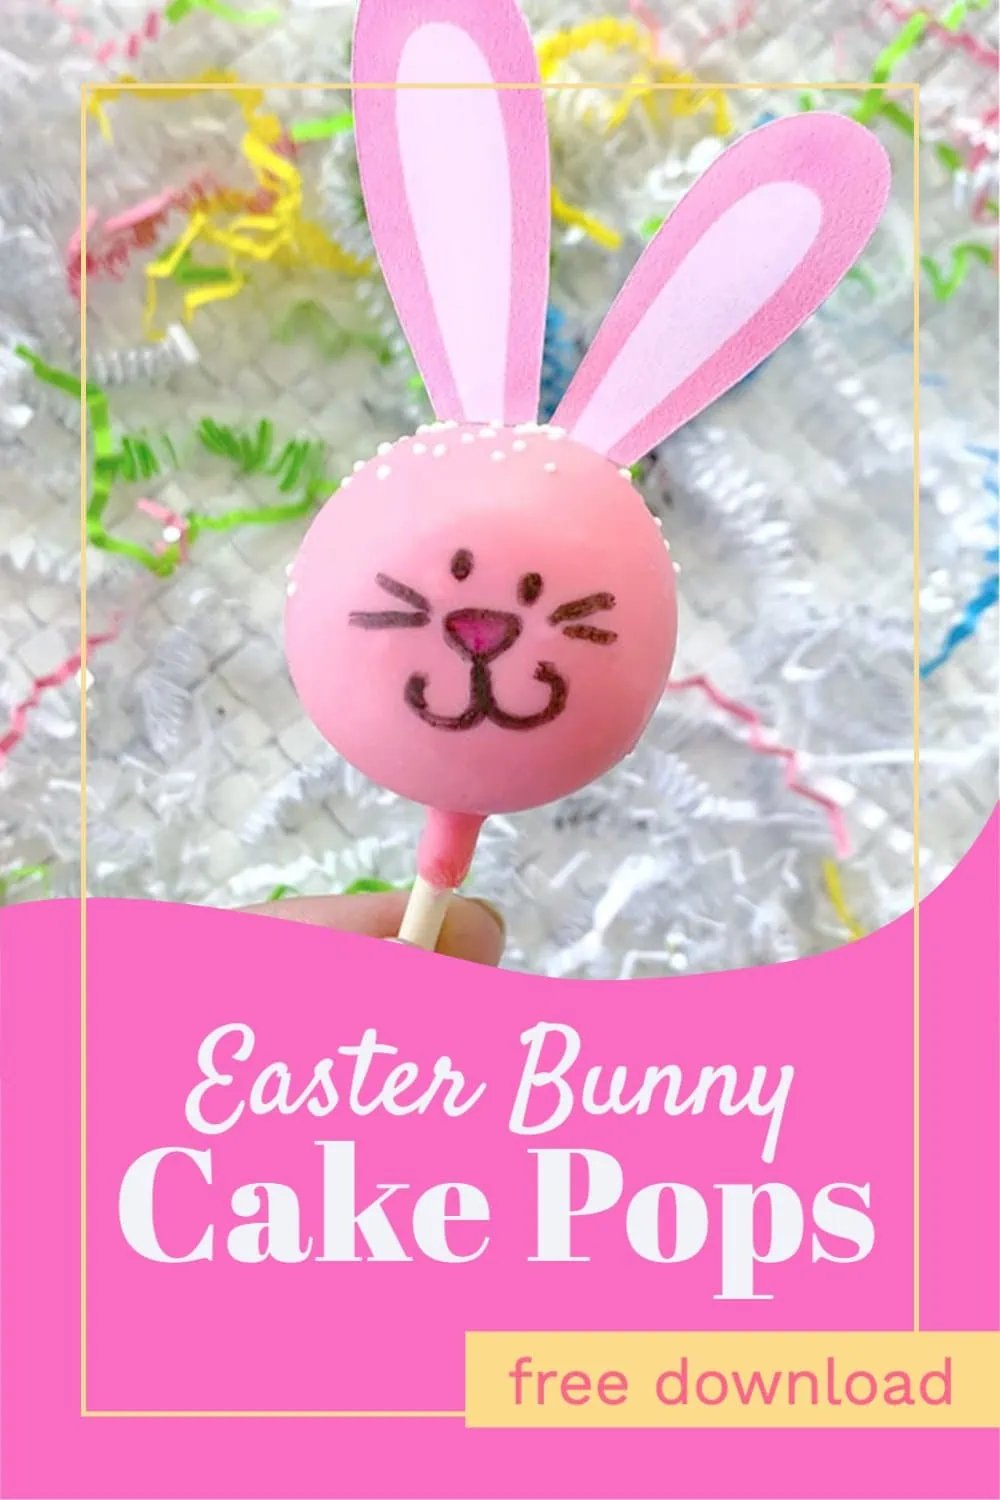 Cute Easter Bunny Cake Pops. Learn how to make your own cute Easter Bunny cake pops with this free tutorial and SVG cut file set. 